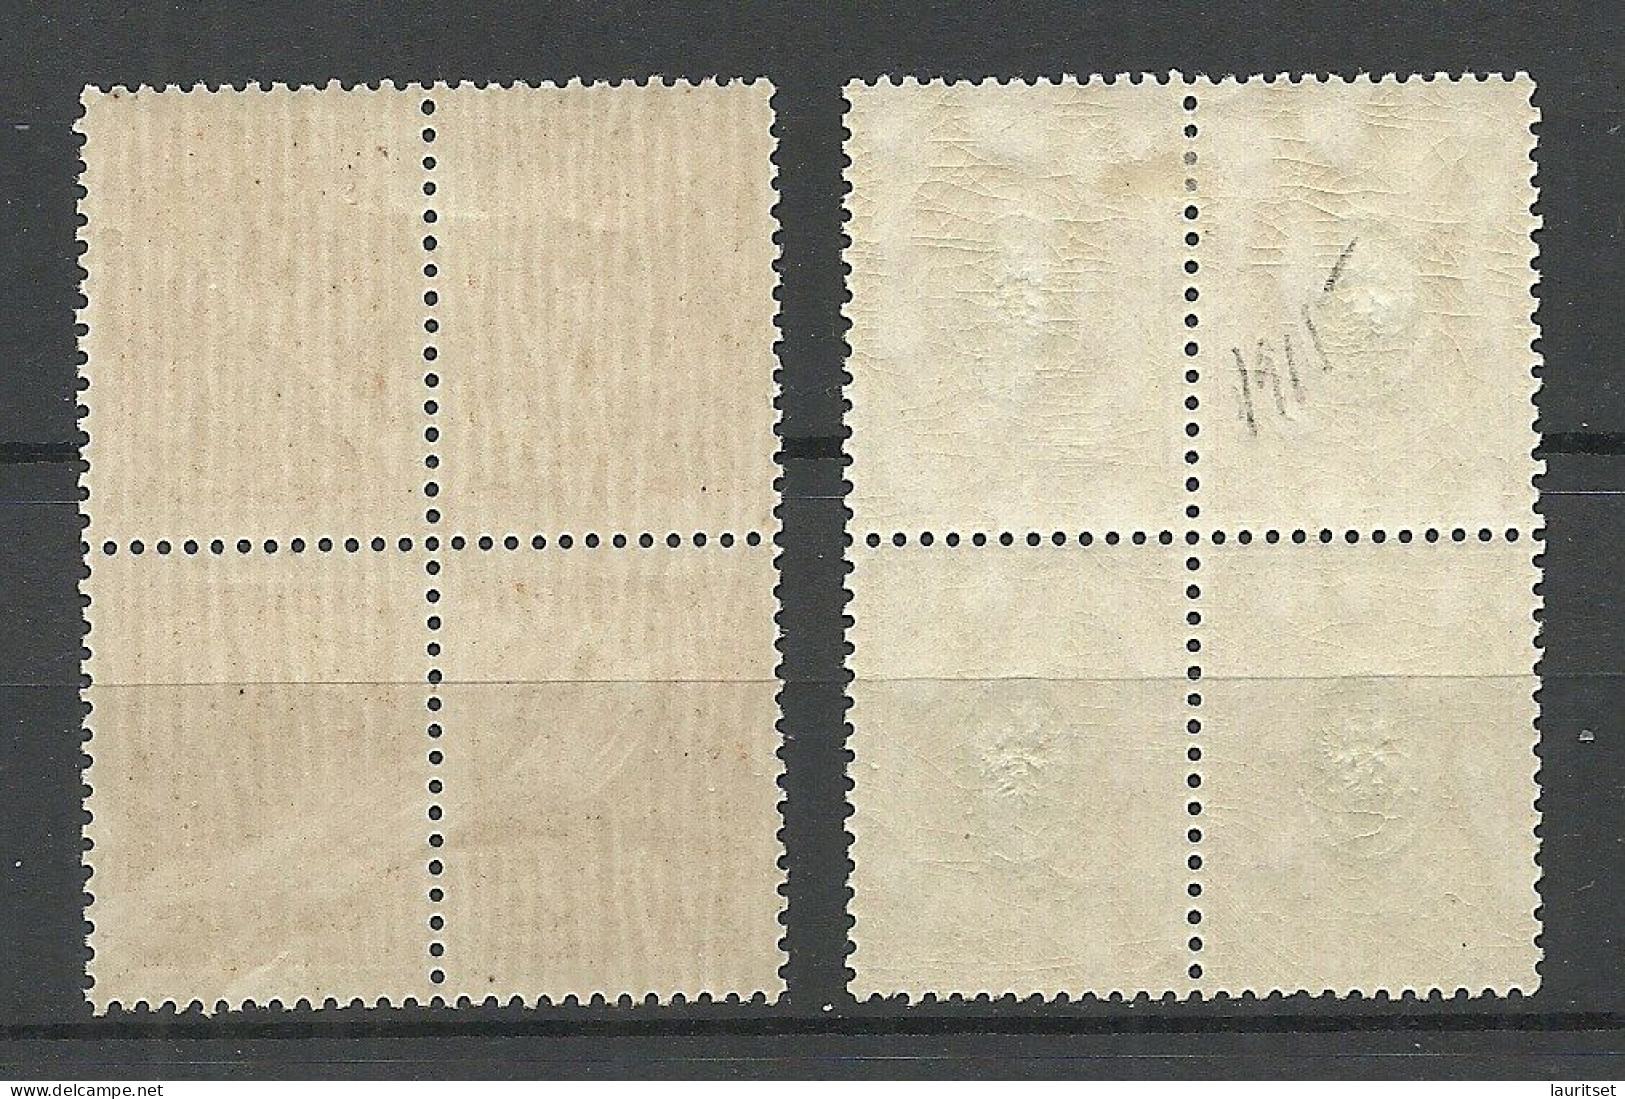 FINLAND FINNLAND 1911 Michel 61 & 65 As 4-blocks MNH/MH (2 Upper Stamps Are MNH/**, Lower Row Is MH/*) - Unused Stamps